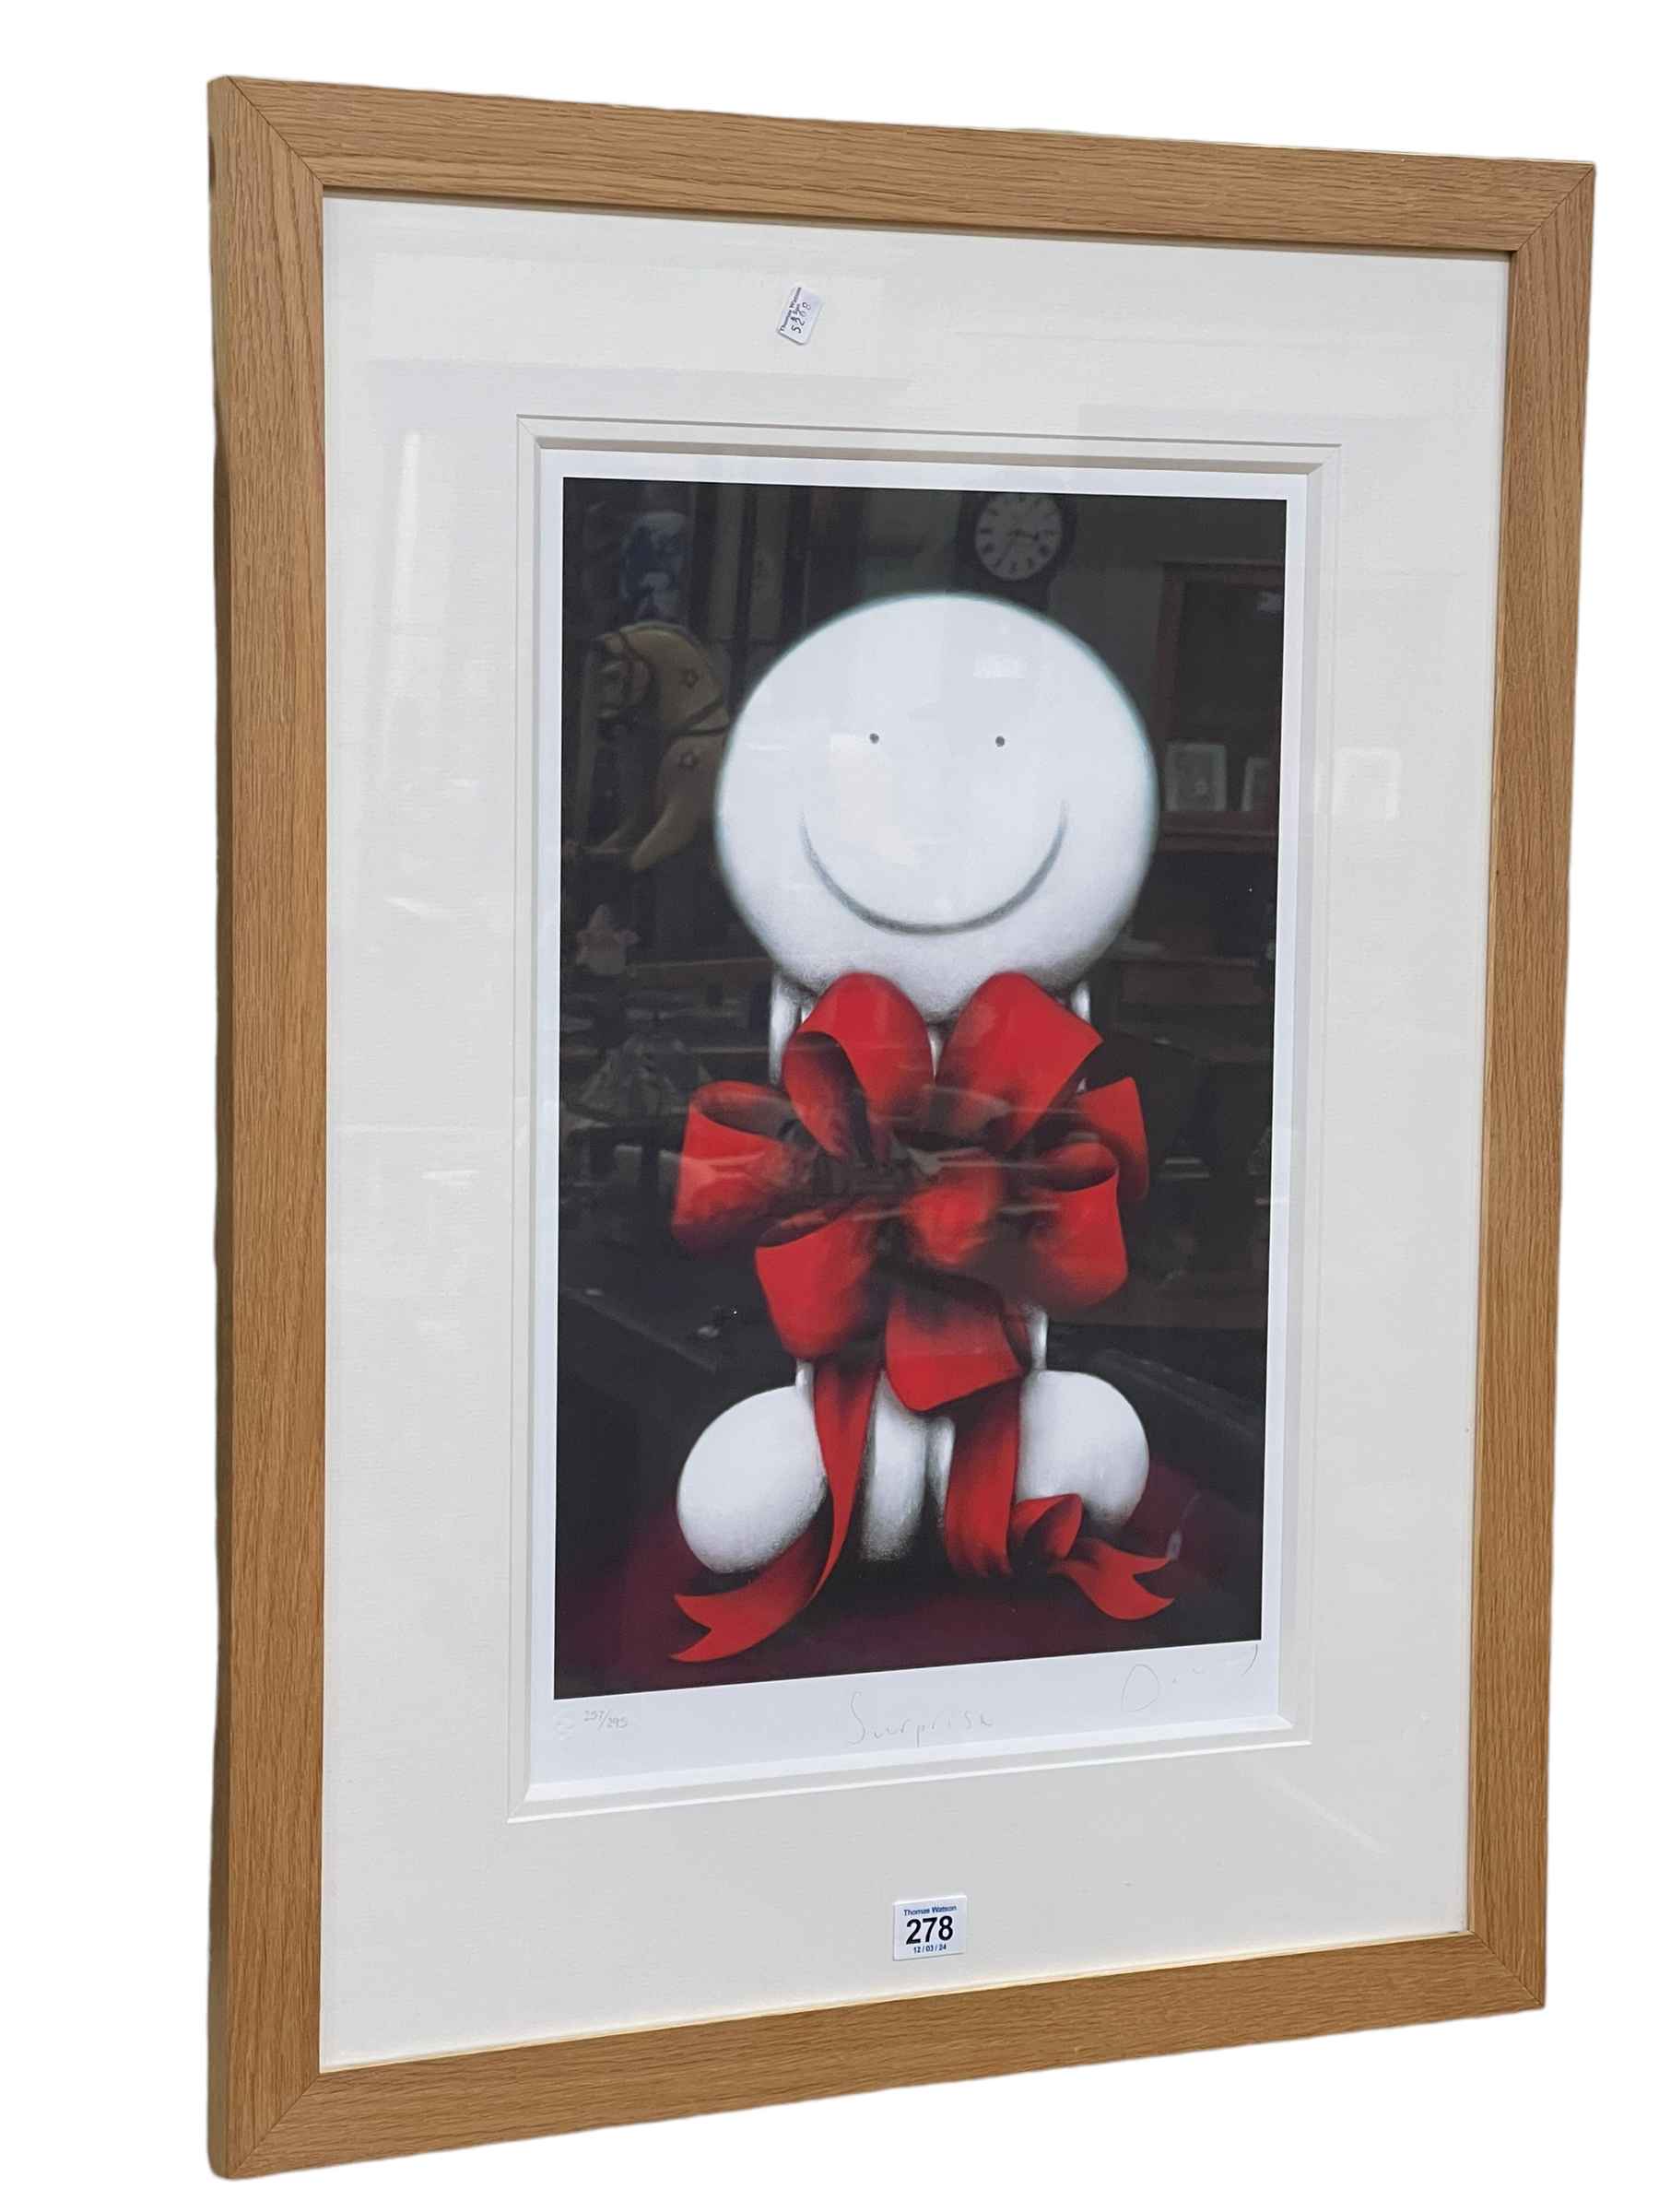 Doug Hyde, Surprise, limited edition giclee on paper, signed, titled and numbered 257/295,